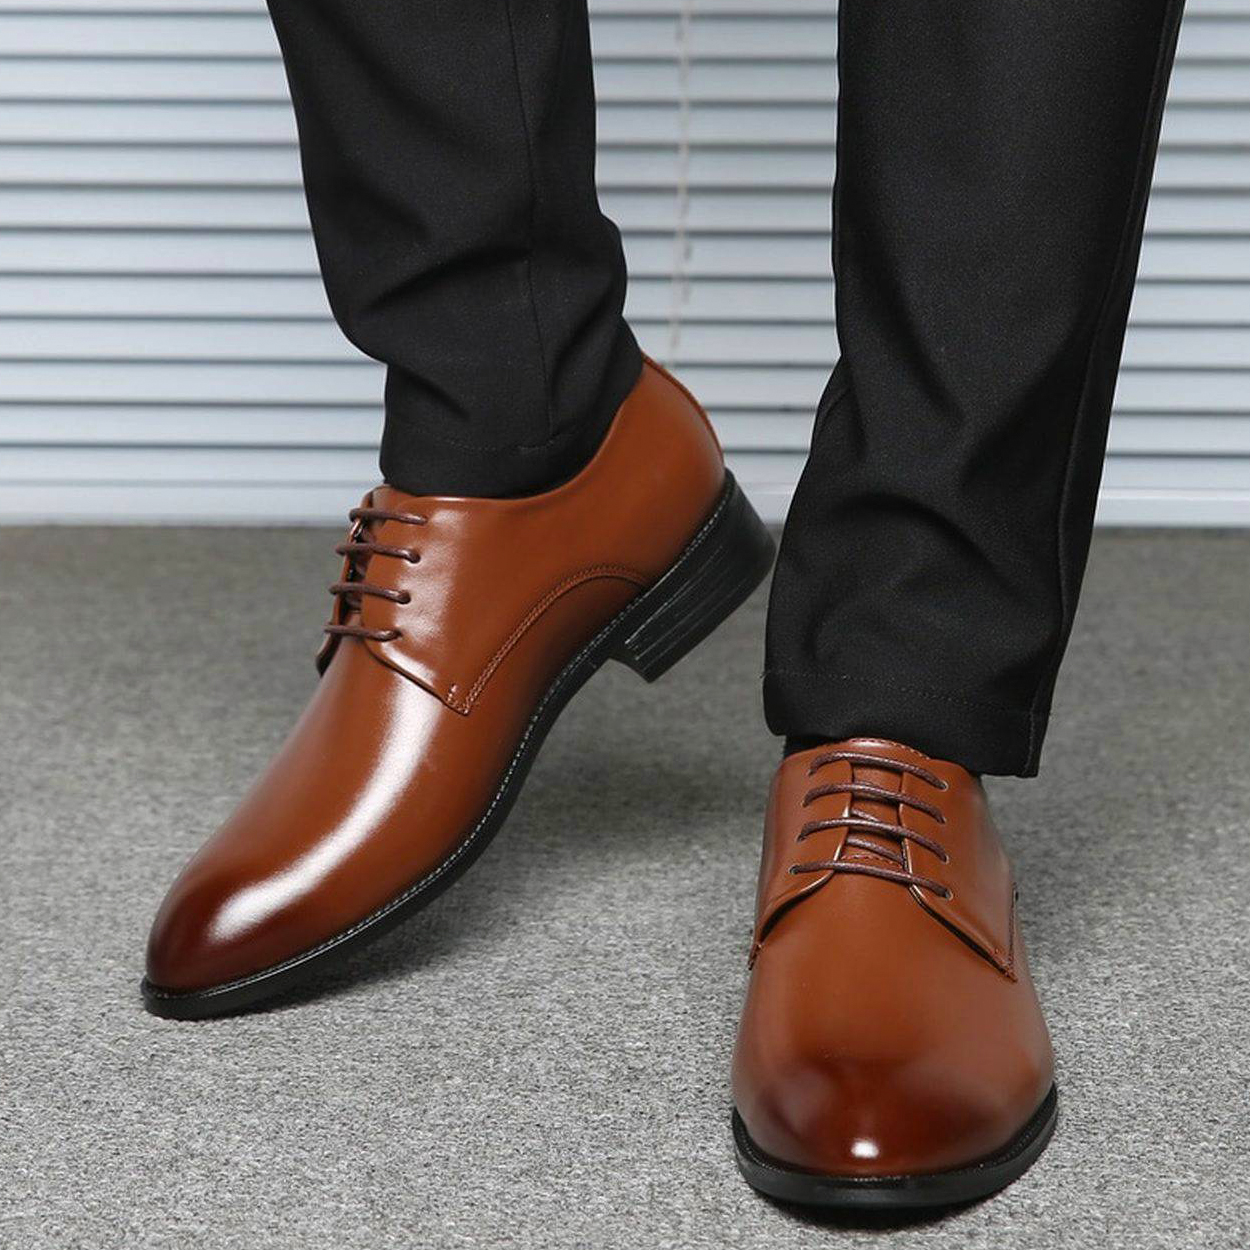 The Only Shoes You'll Wear With Formal Pants - The Shoestopper